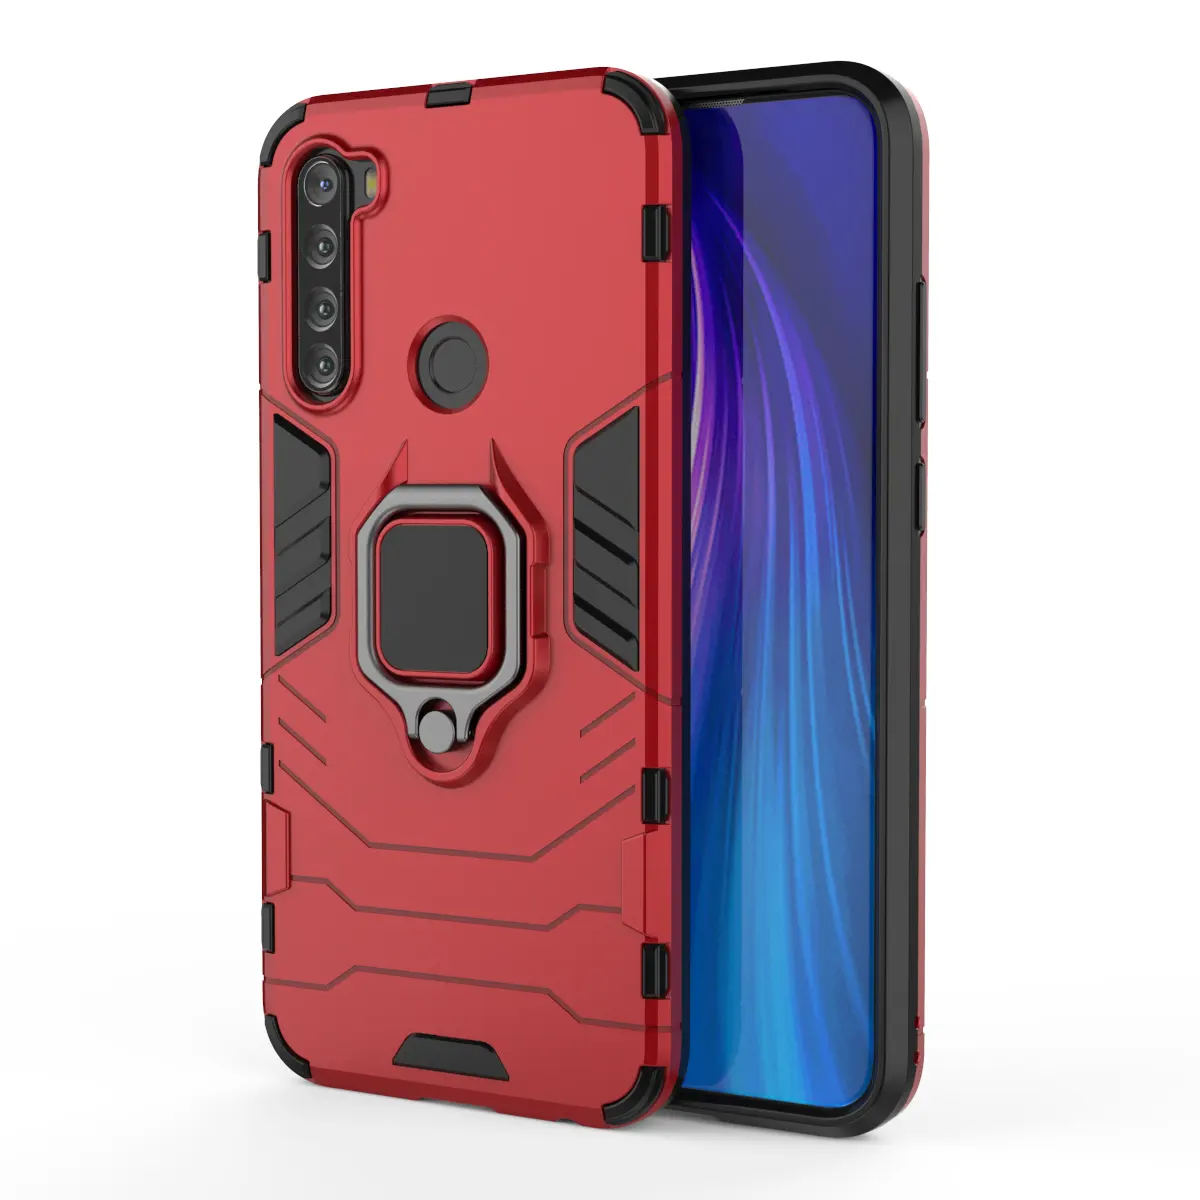 new design Wholesale Cell phone case Kickstand shockproof phone cover For Redmi Note 8T good quality eco friendly back cover